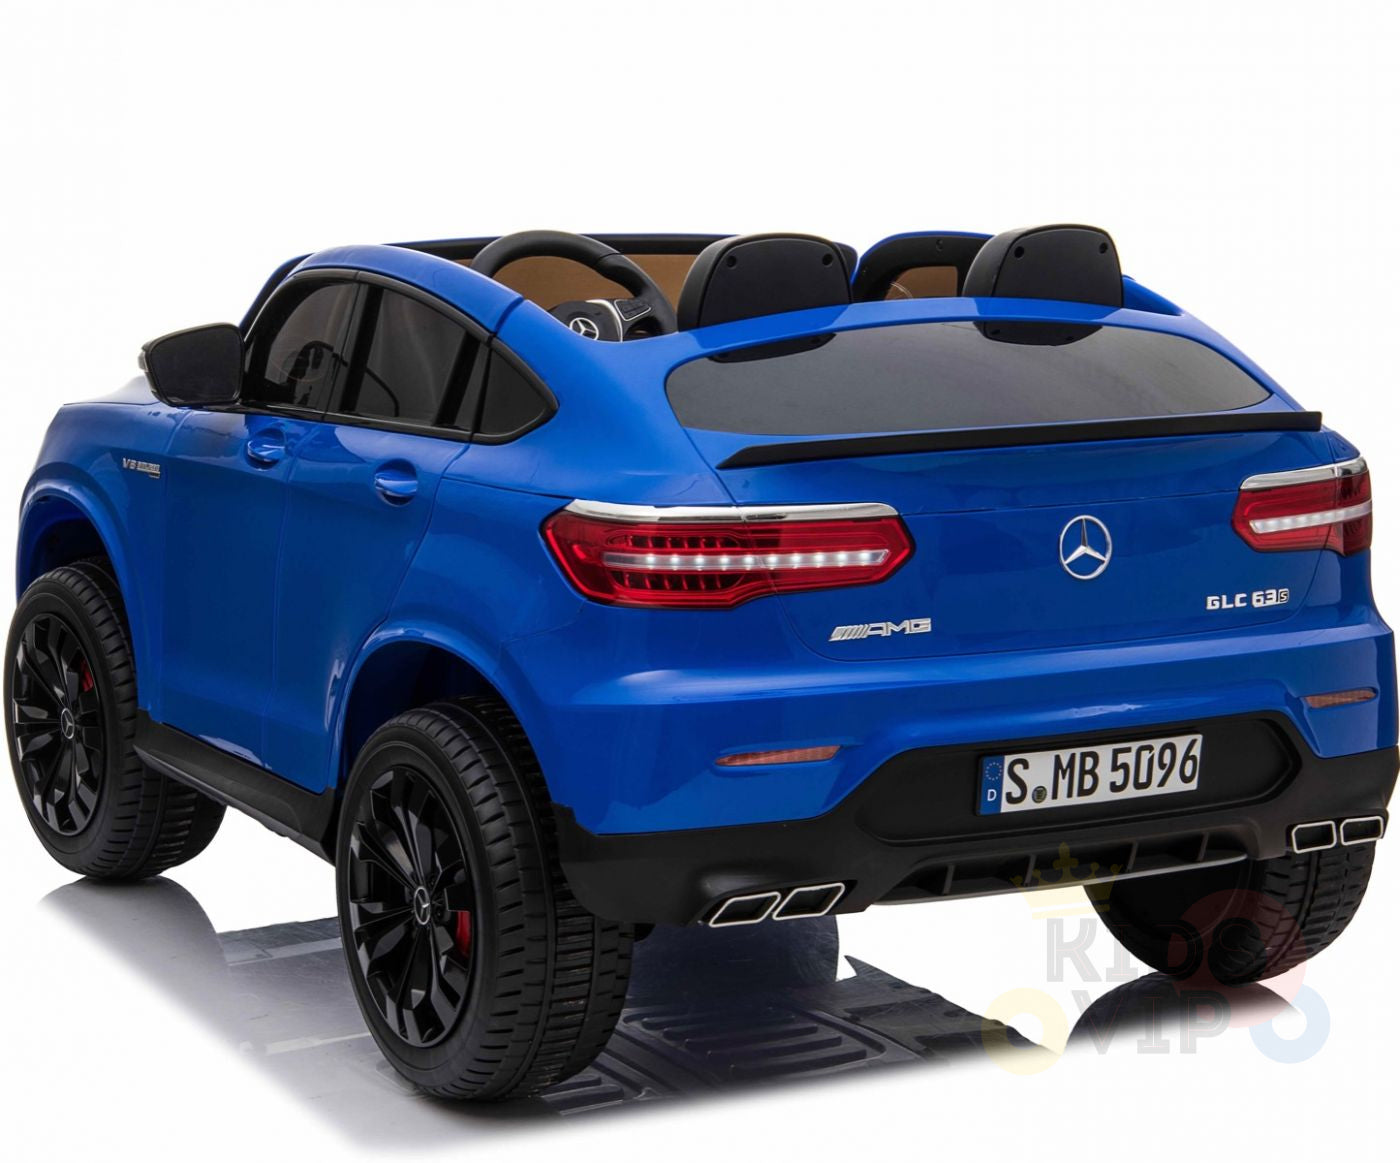 Blue Mercedes AMG GLC63 S Coupe 2 Seater Kids Ride On Car, electric powered, with top down, rear angle view"
